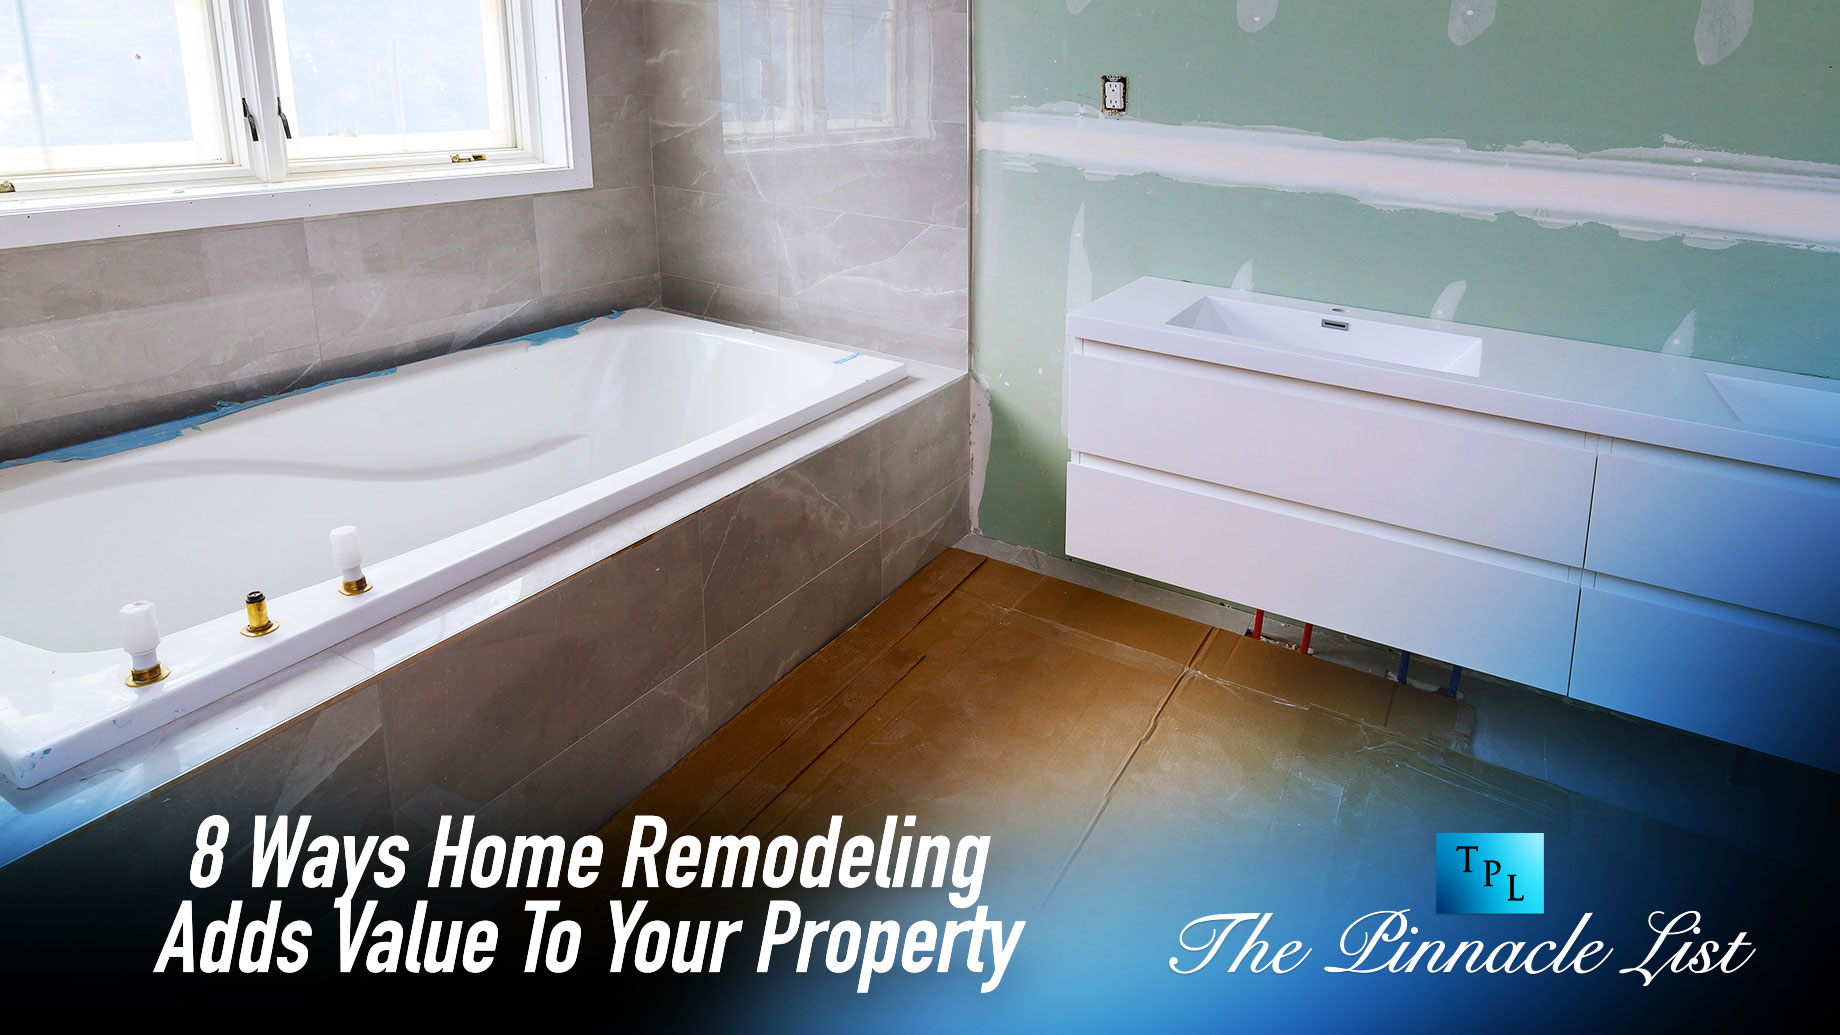 8 Ways Home Remodeling Adds Value To Your Property